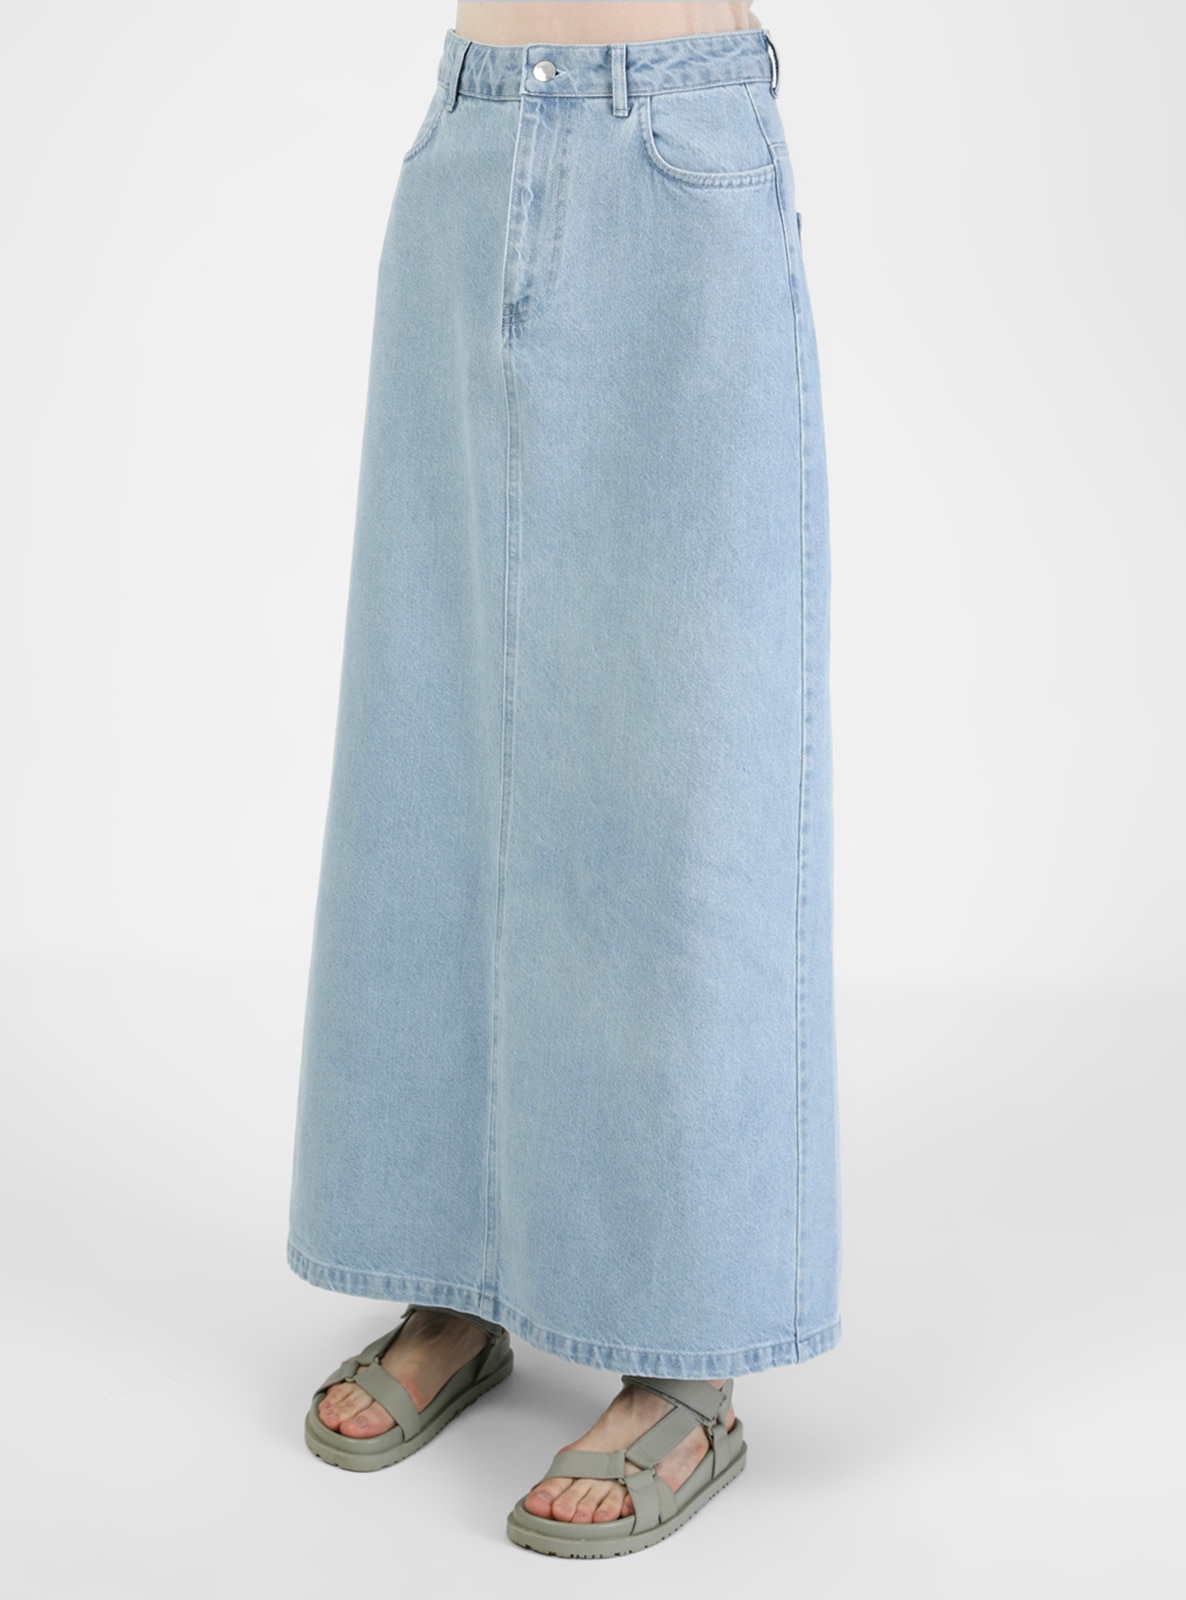 Natural Fabric Contrast Stitching Jeans Skirt Ice Blue